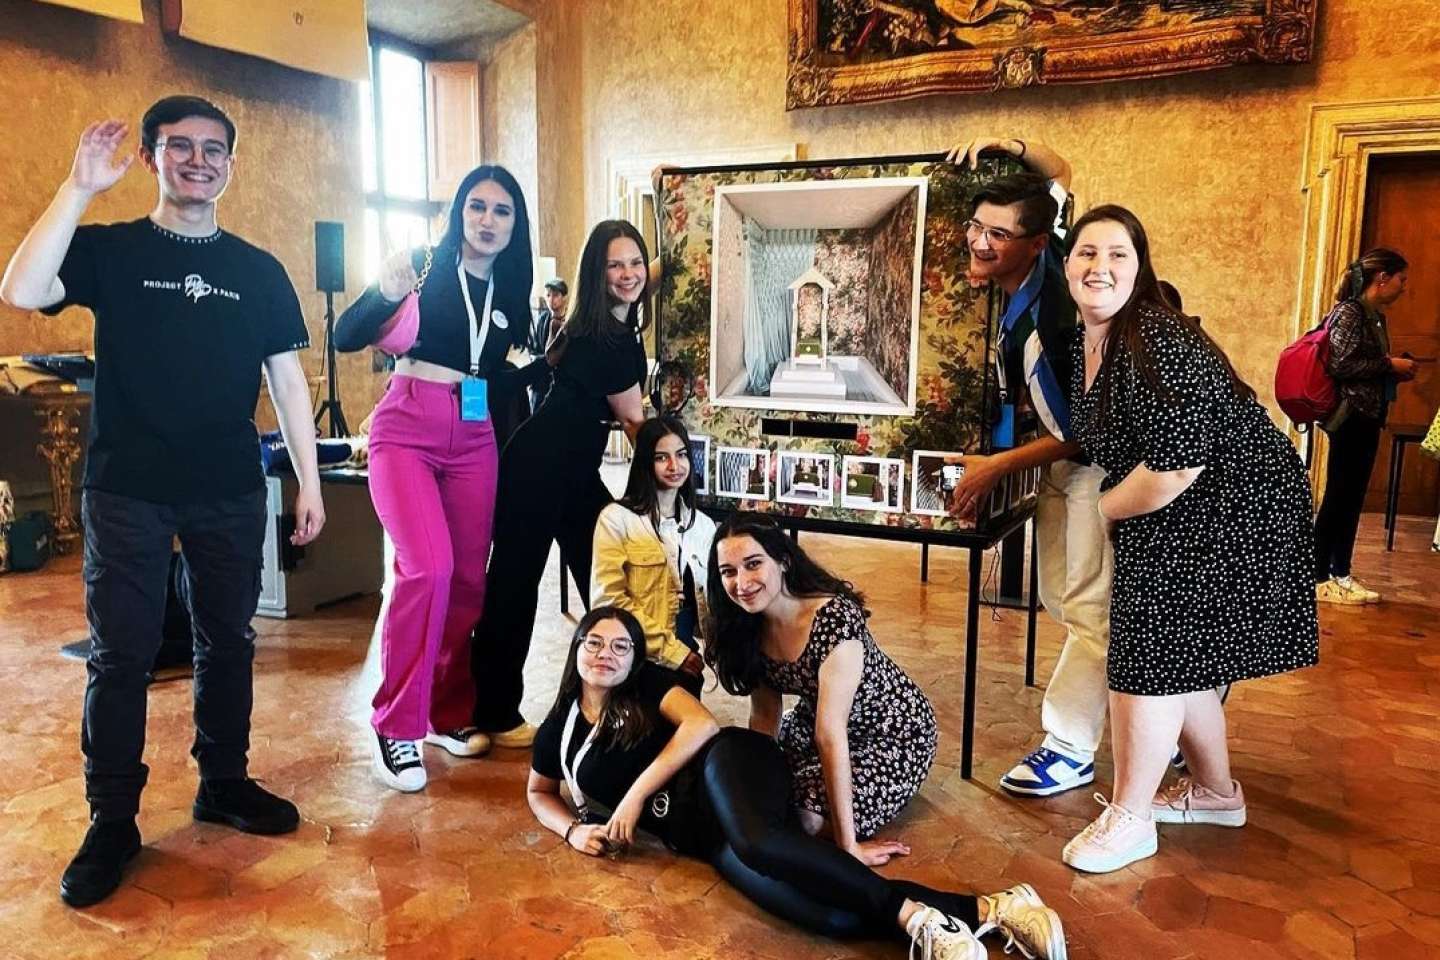 Vocational high school students, future upholsterers, pastry chefs or costume designers, shine at the Villa Médicis